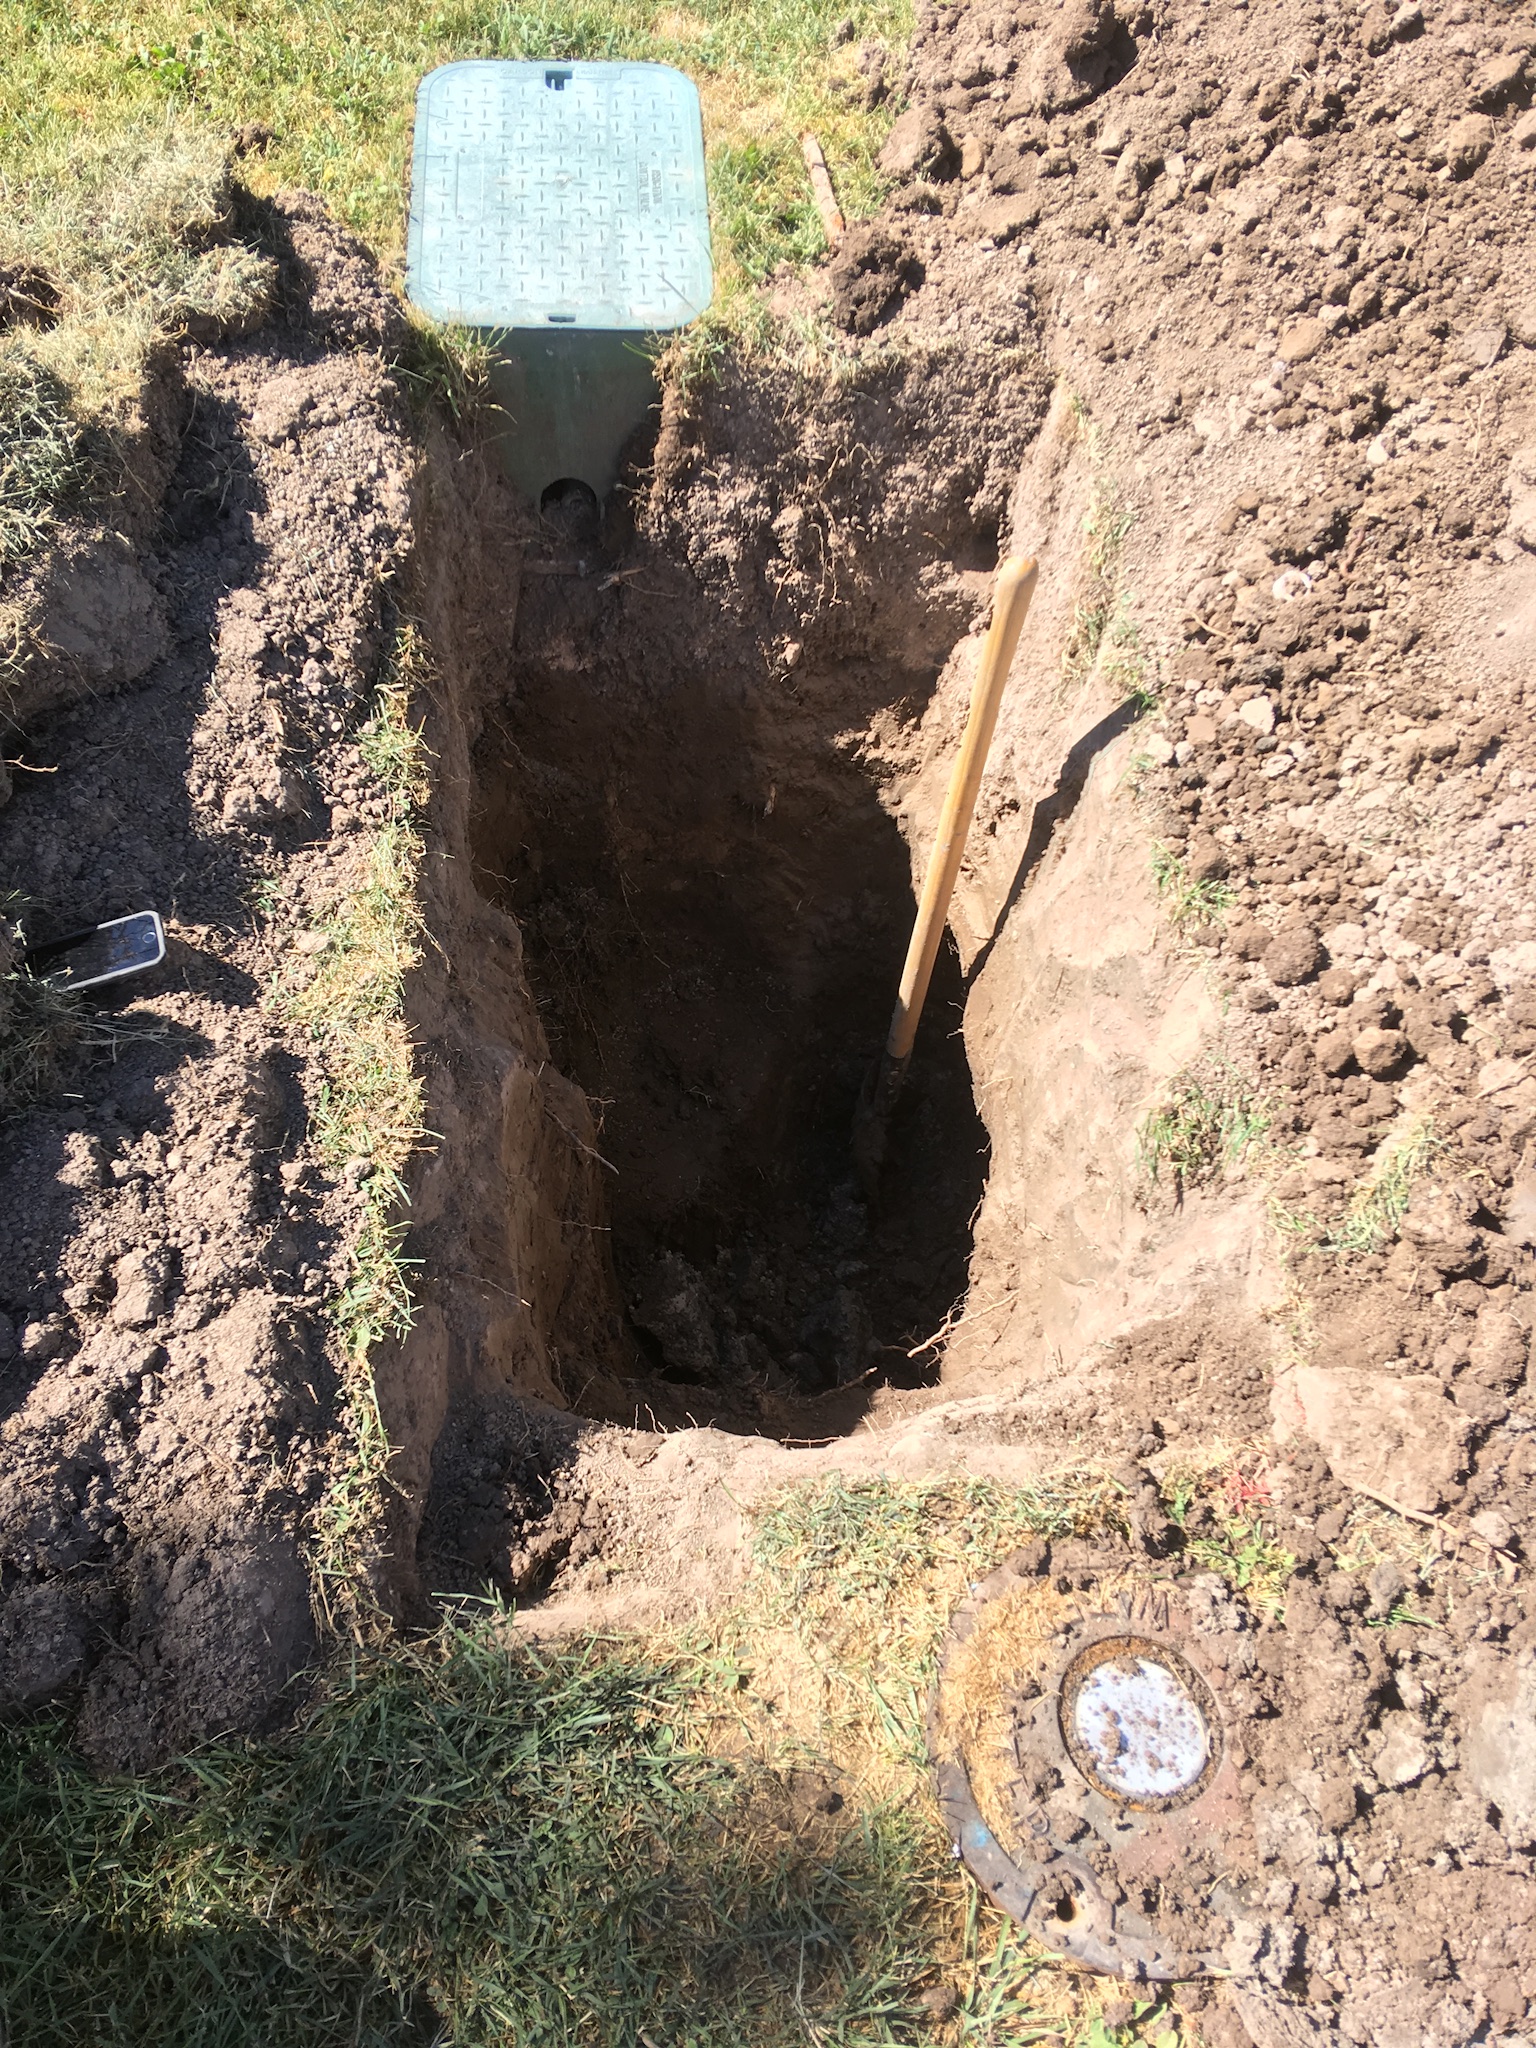 Just Another Perfectly Dug Hole.